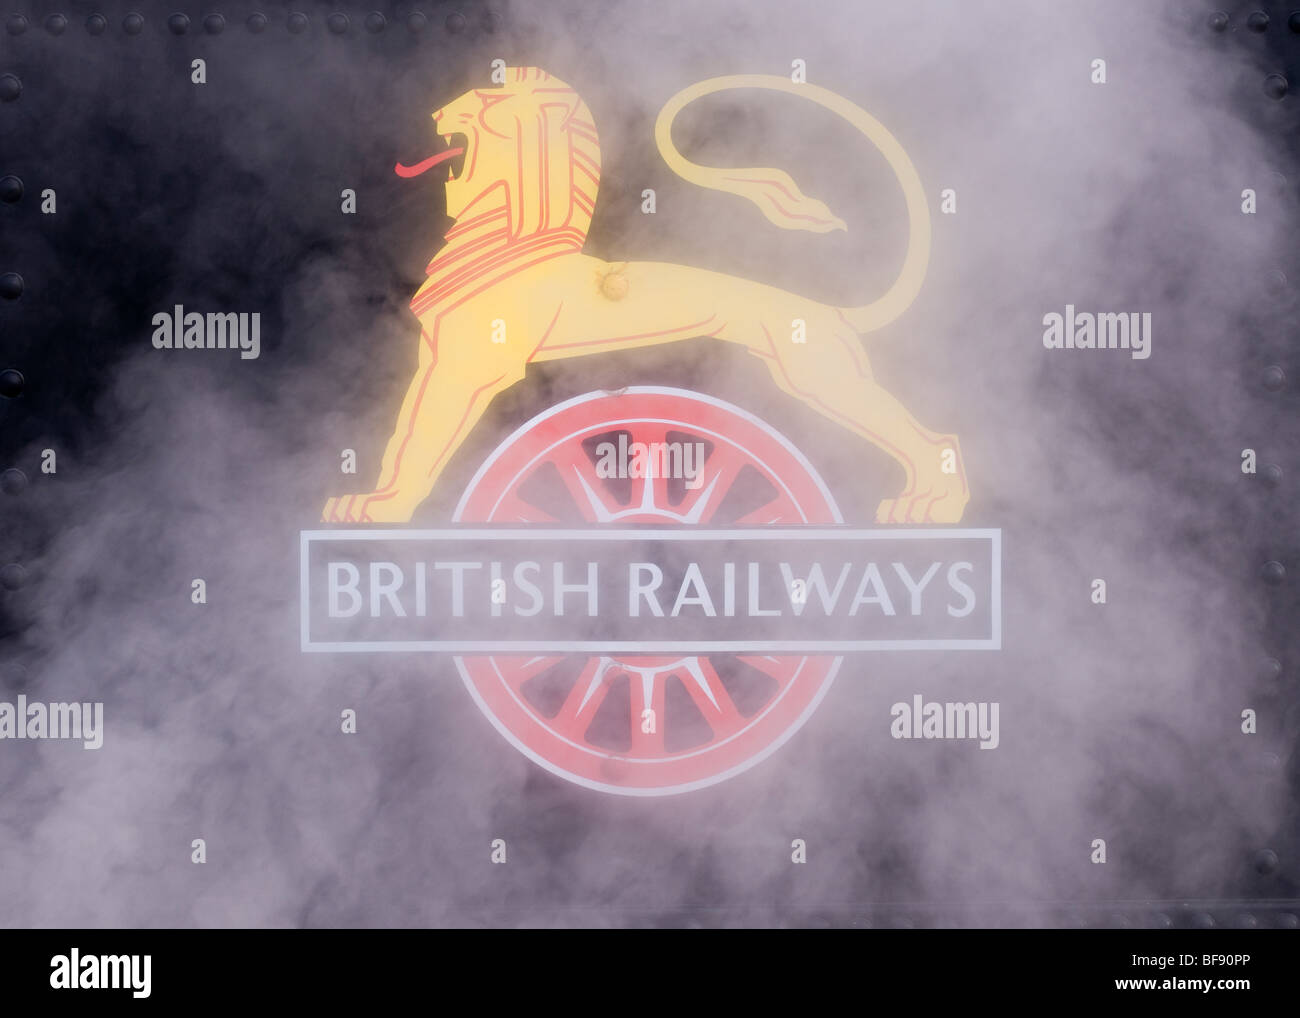 A British Railways Lion logo slightly obscured by steam Stock Photo